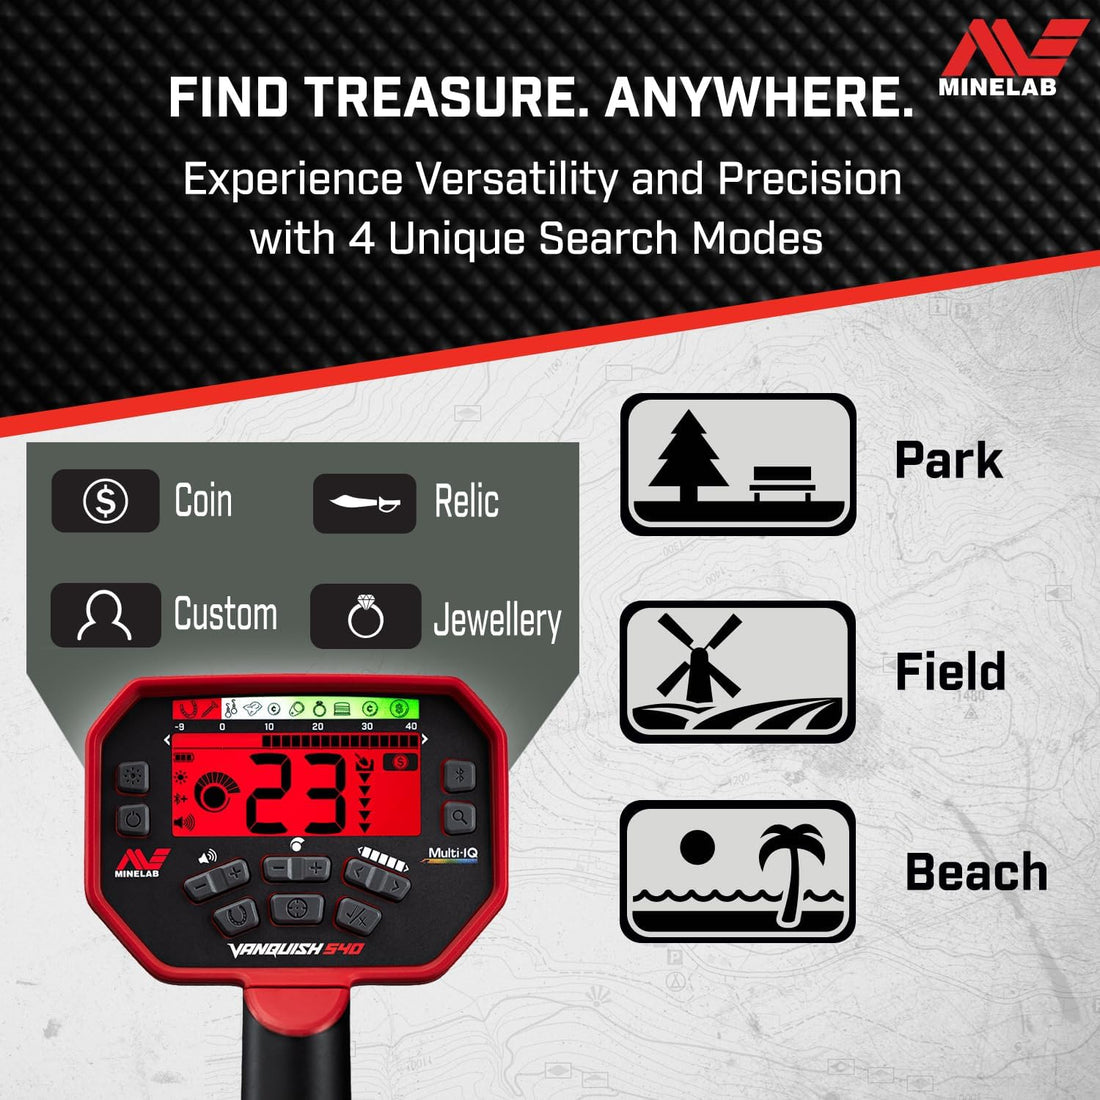 Minelab Vanquish 540 Multi-Frequency Pinpointing Metal Detector PRO PACK with Iron Bias & V12 12"x9" Double-D Waterproof Coil (4 Detect Modes, Bluetooth Headphones & Rain Cover Included)